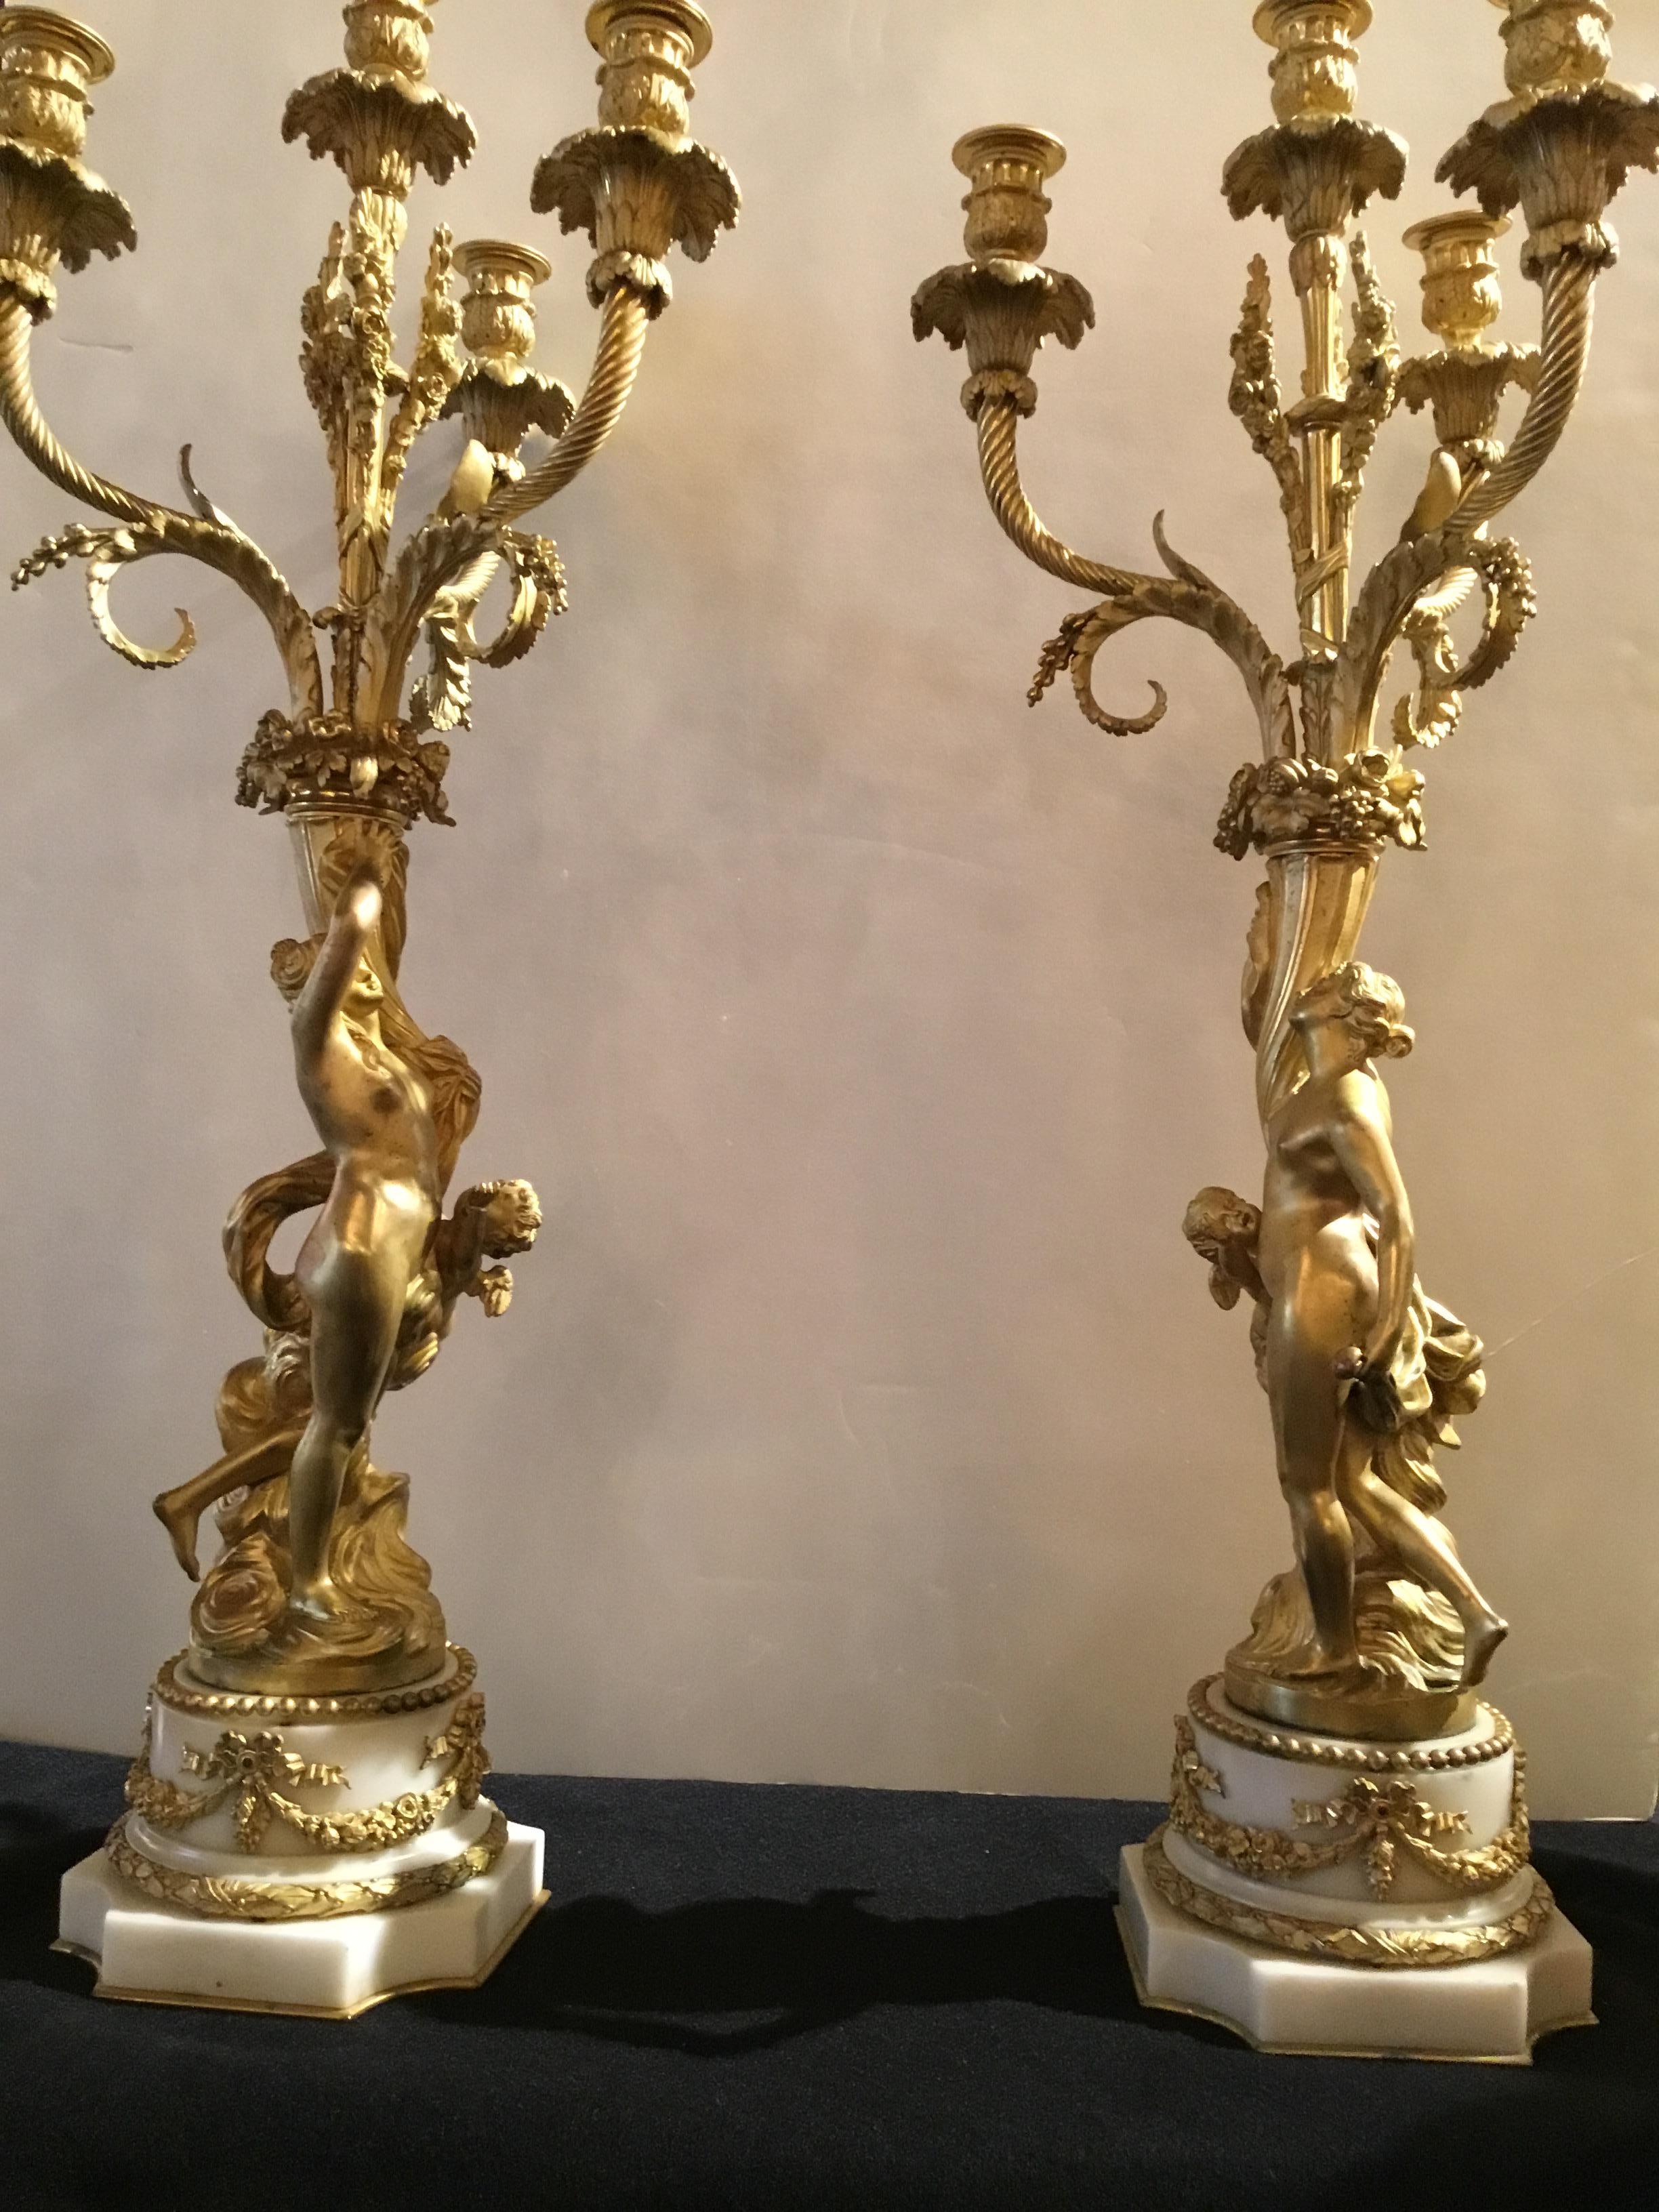 Pair of French Gilt Bronze Figural Candelabra circa 1790 on White Marble Bases 6